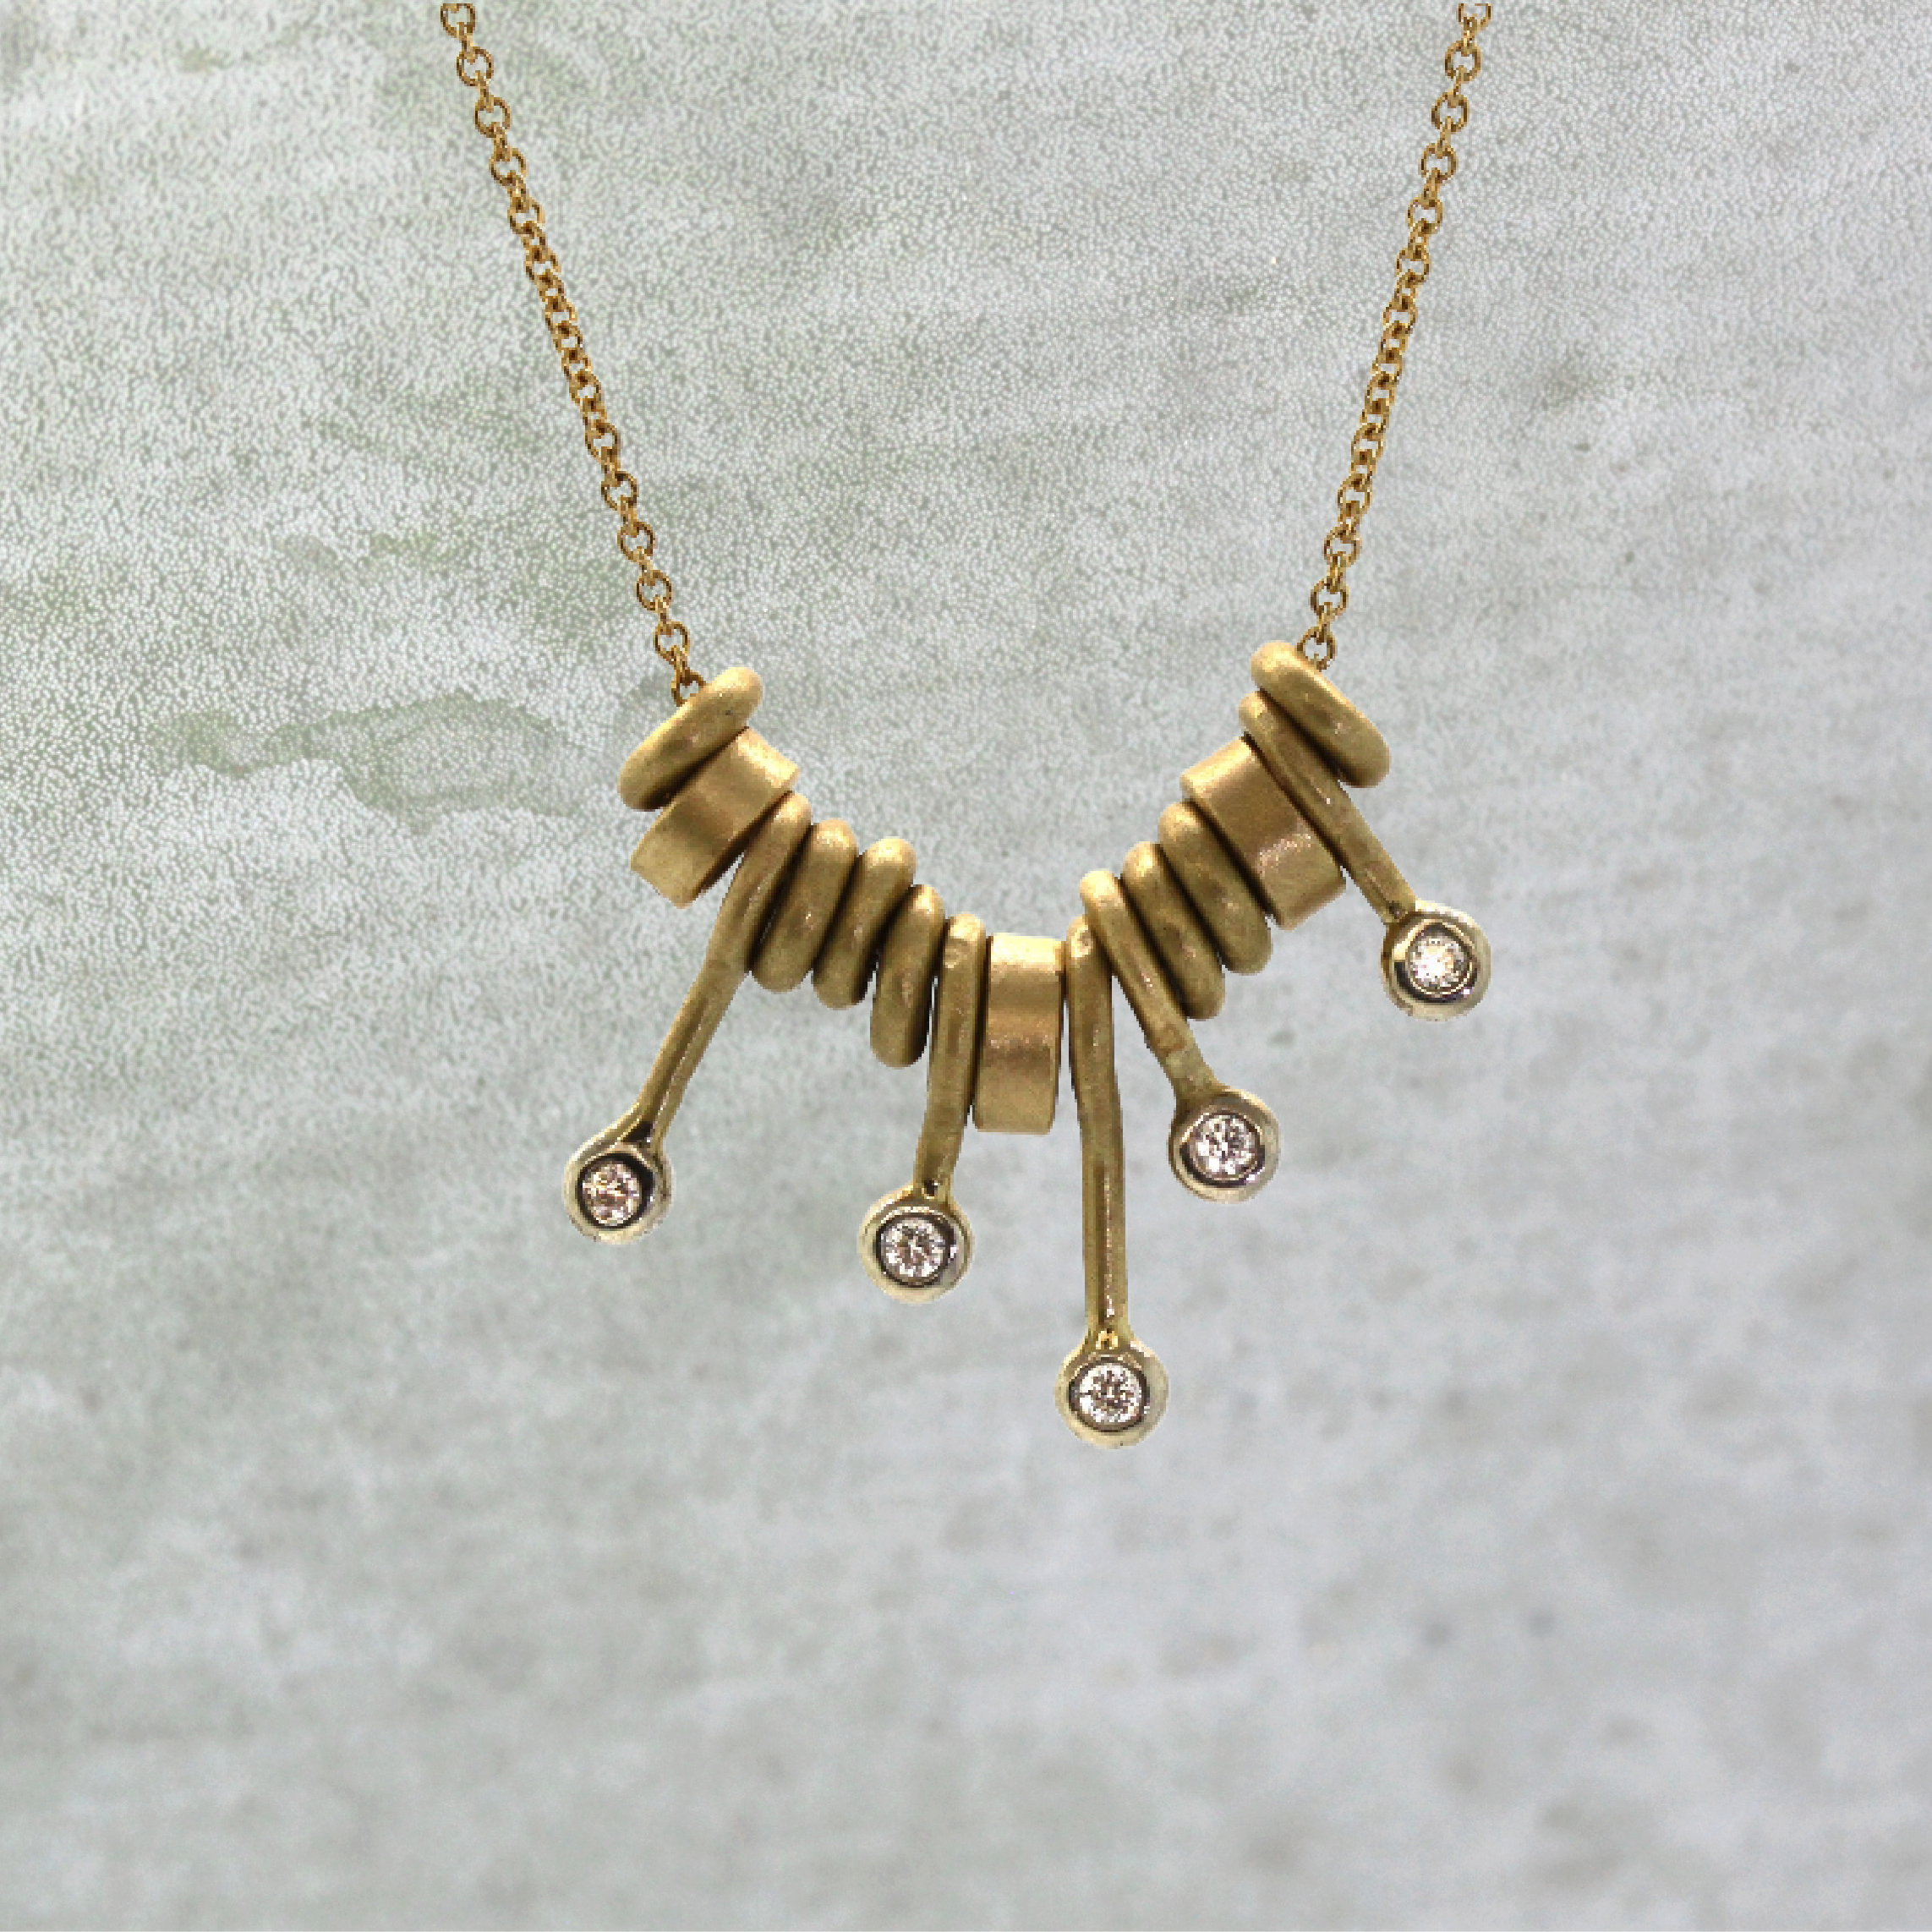 Charming Gold Stick Necklace